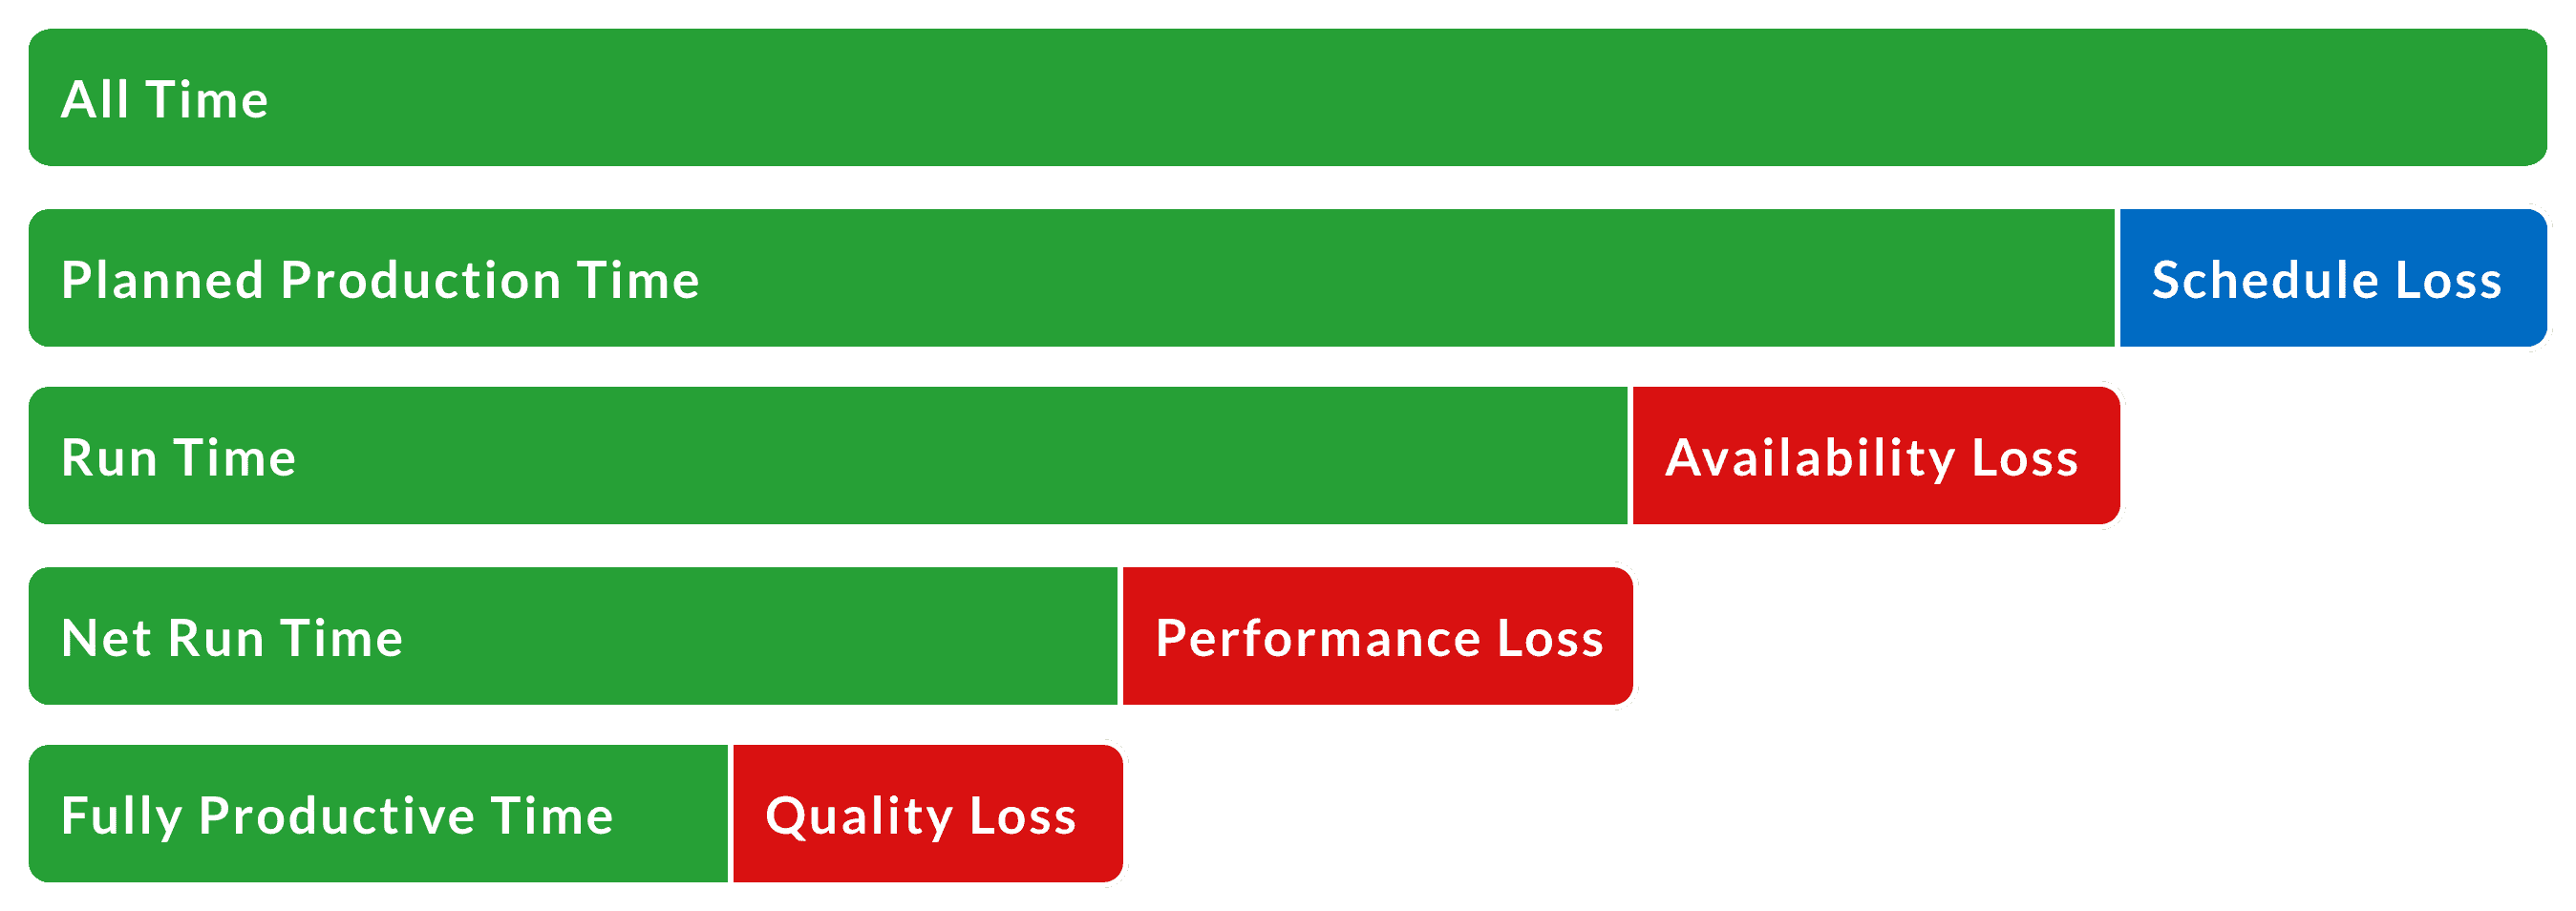 All time broken down: including schedule loss it becomes planned production time. Including availaibility loss it becomes run time. Without performance loss it becomes net run time. Finally, including quality loss it becomes fully productive time.